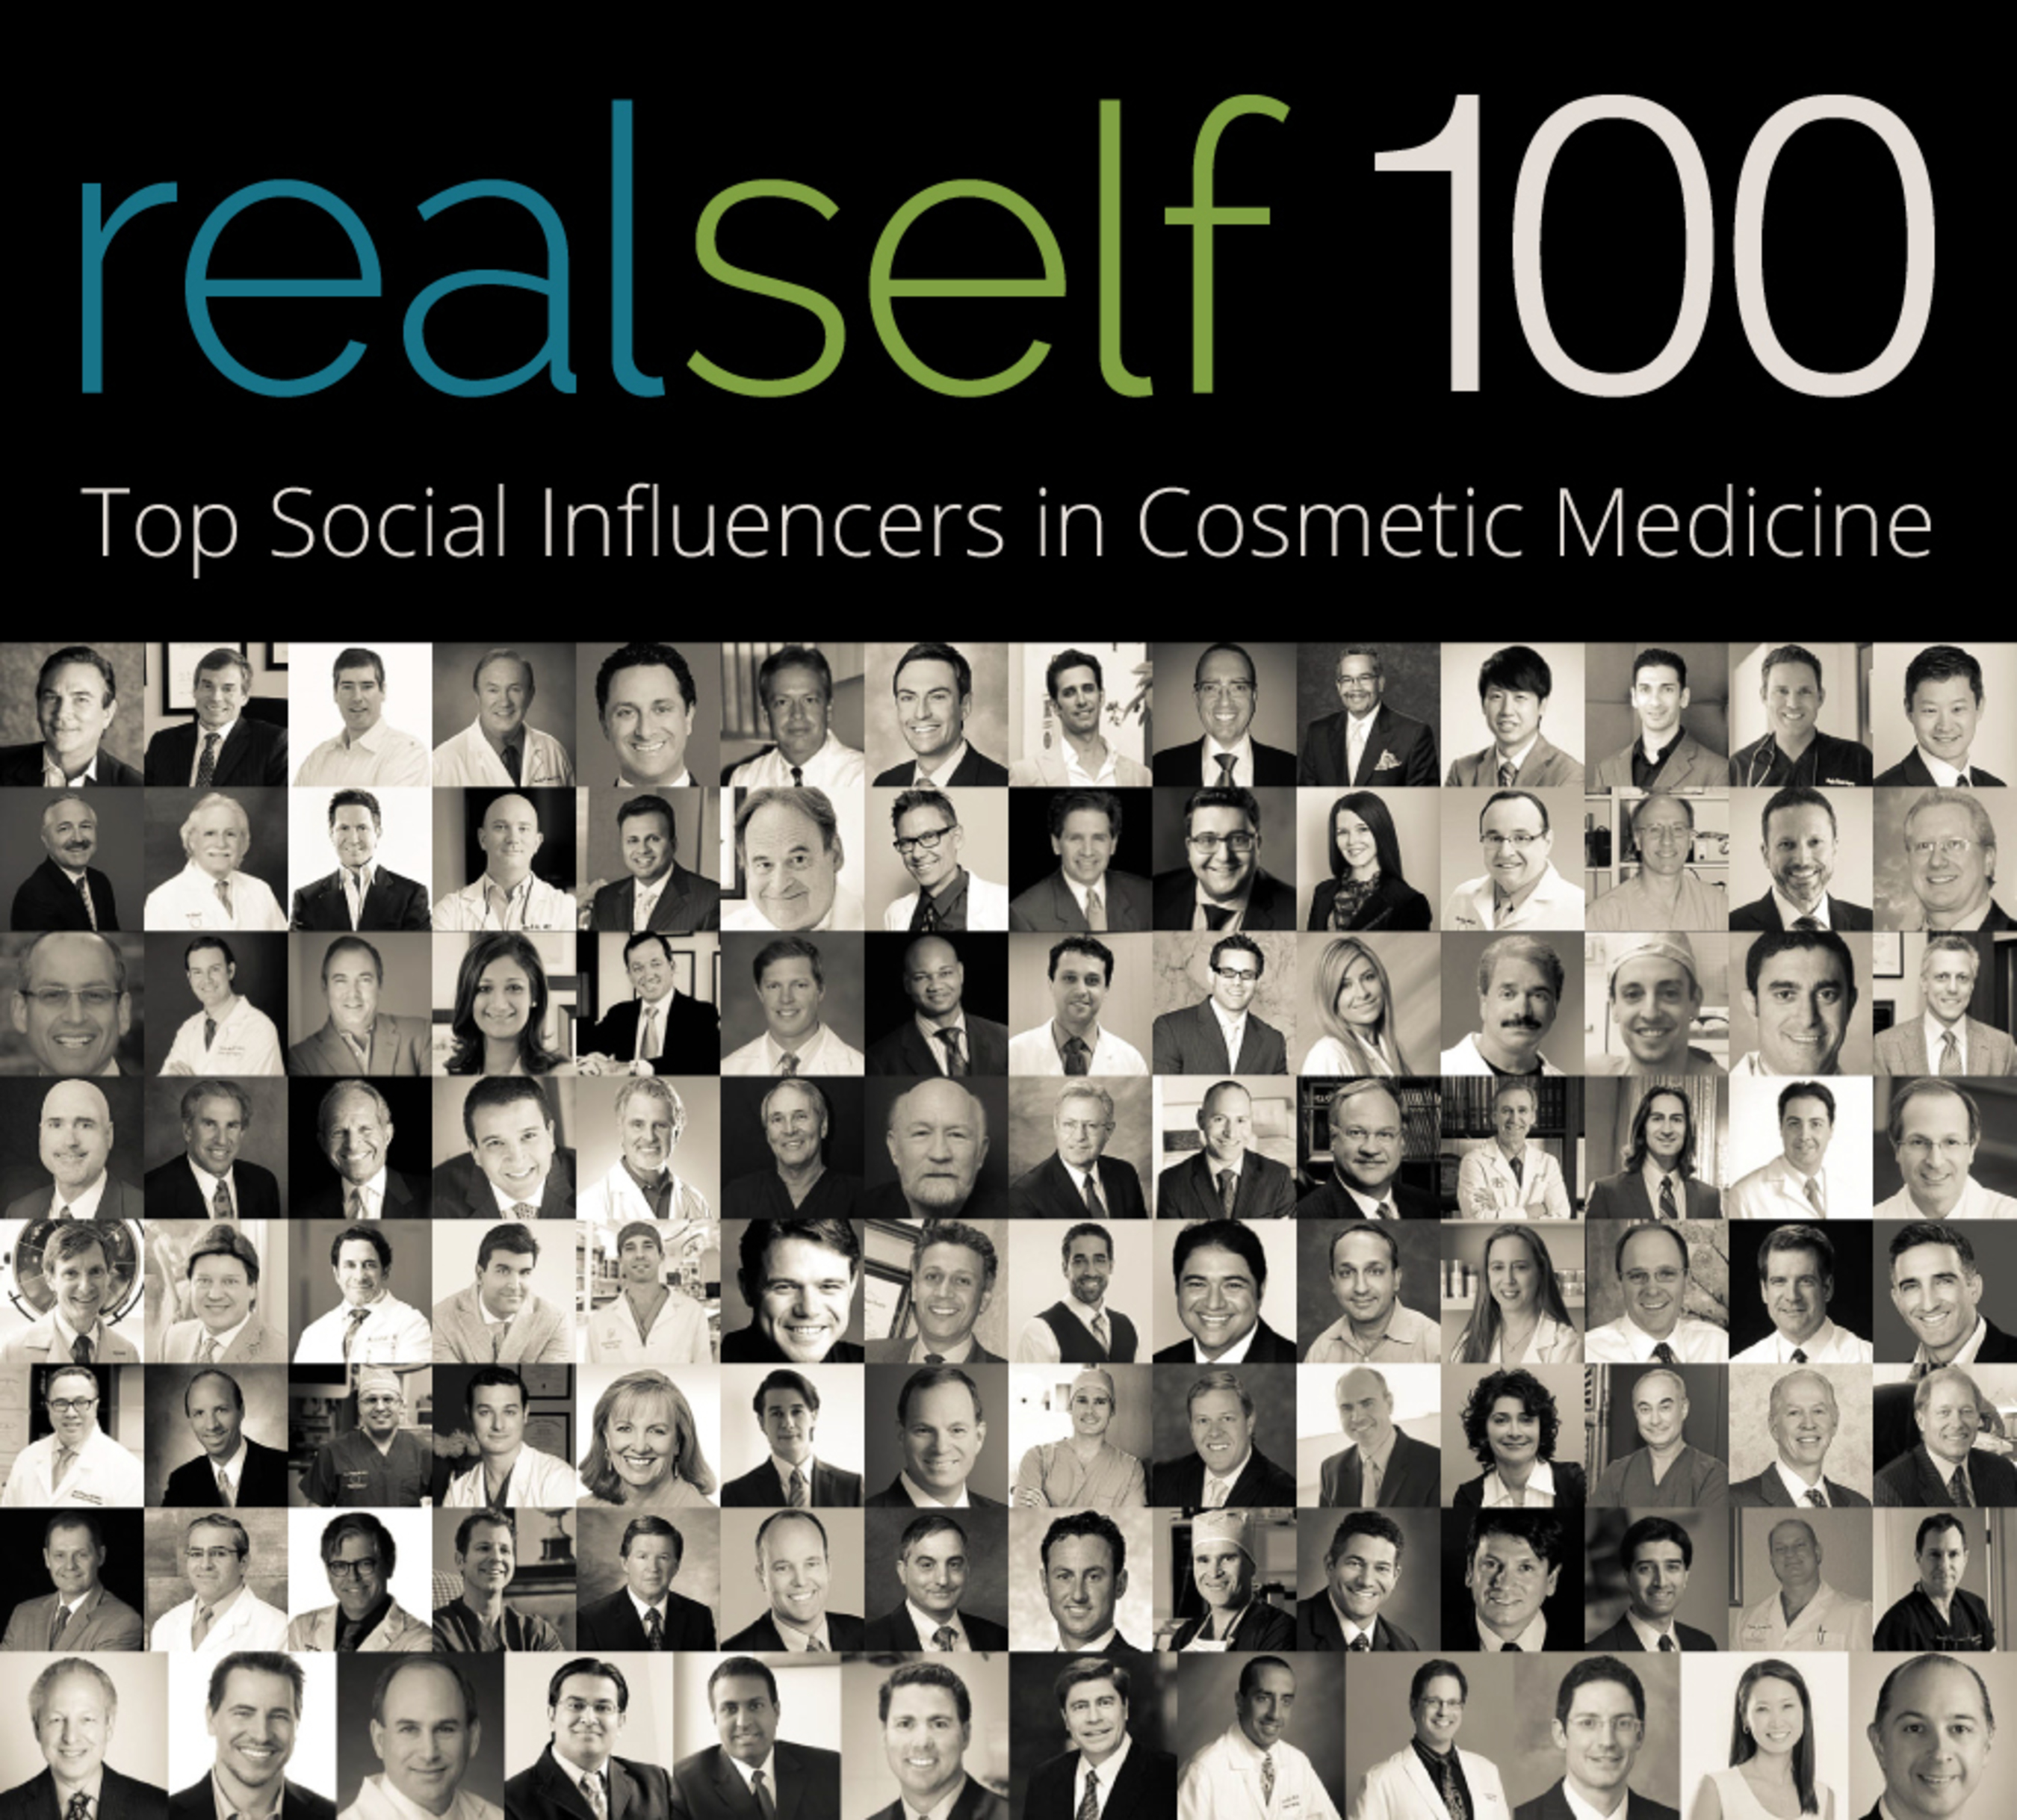 Meet the Top 100 Social Media Influencers in Cosmetic Medicine. The RealSelf 100 Recognizes Leading Plastic Surgeons, Facial Plastic Surgeons and Dermatologists for Dedication to Consumer Education.  (PRNewsFoto/RealSelf)